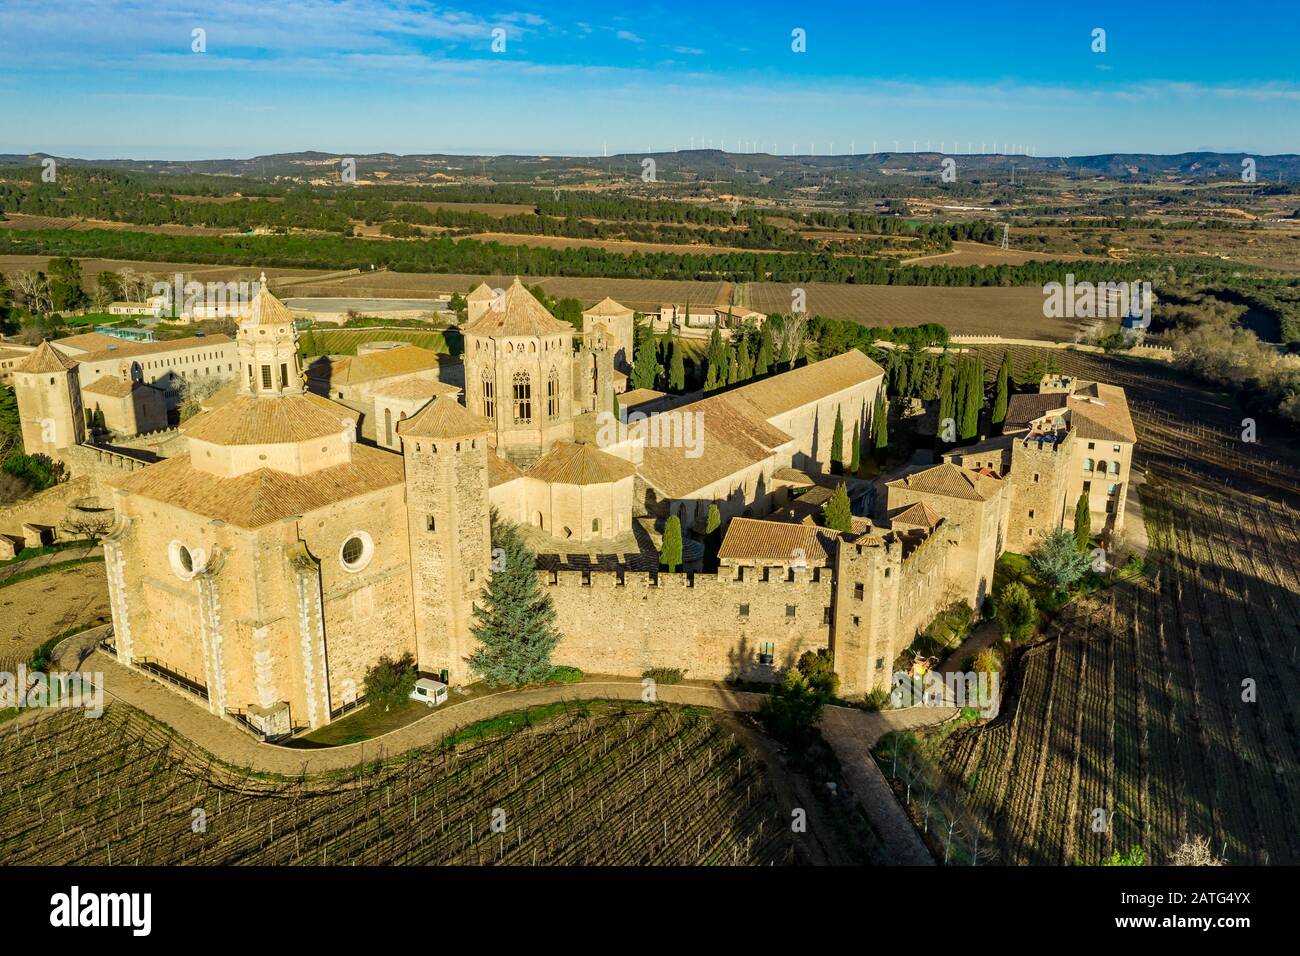 Aerial view of the Royal Abbey of Santa Maria de Poblet a Cistercian fortified monastery, founded in 1151 in Catalunya Spain Stock Photo